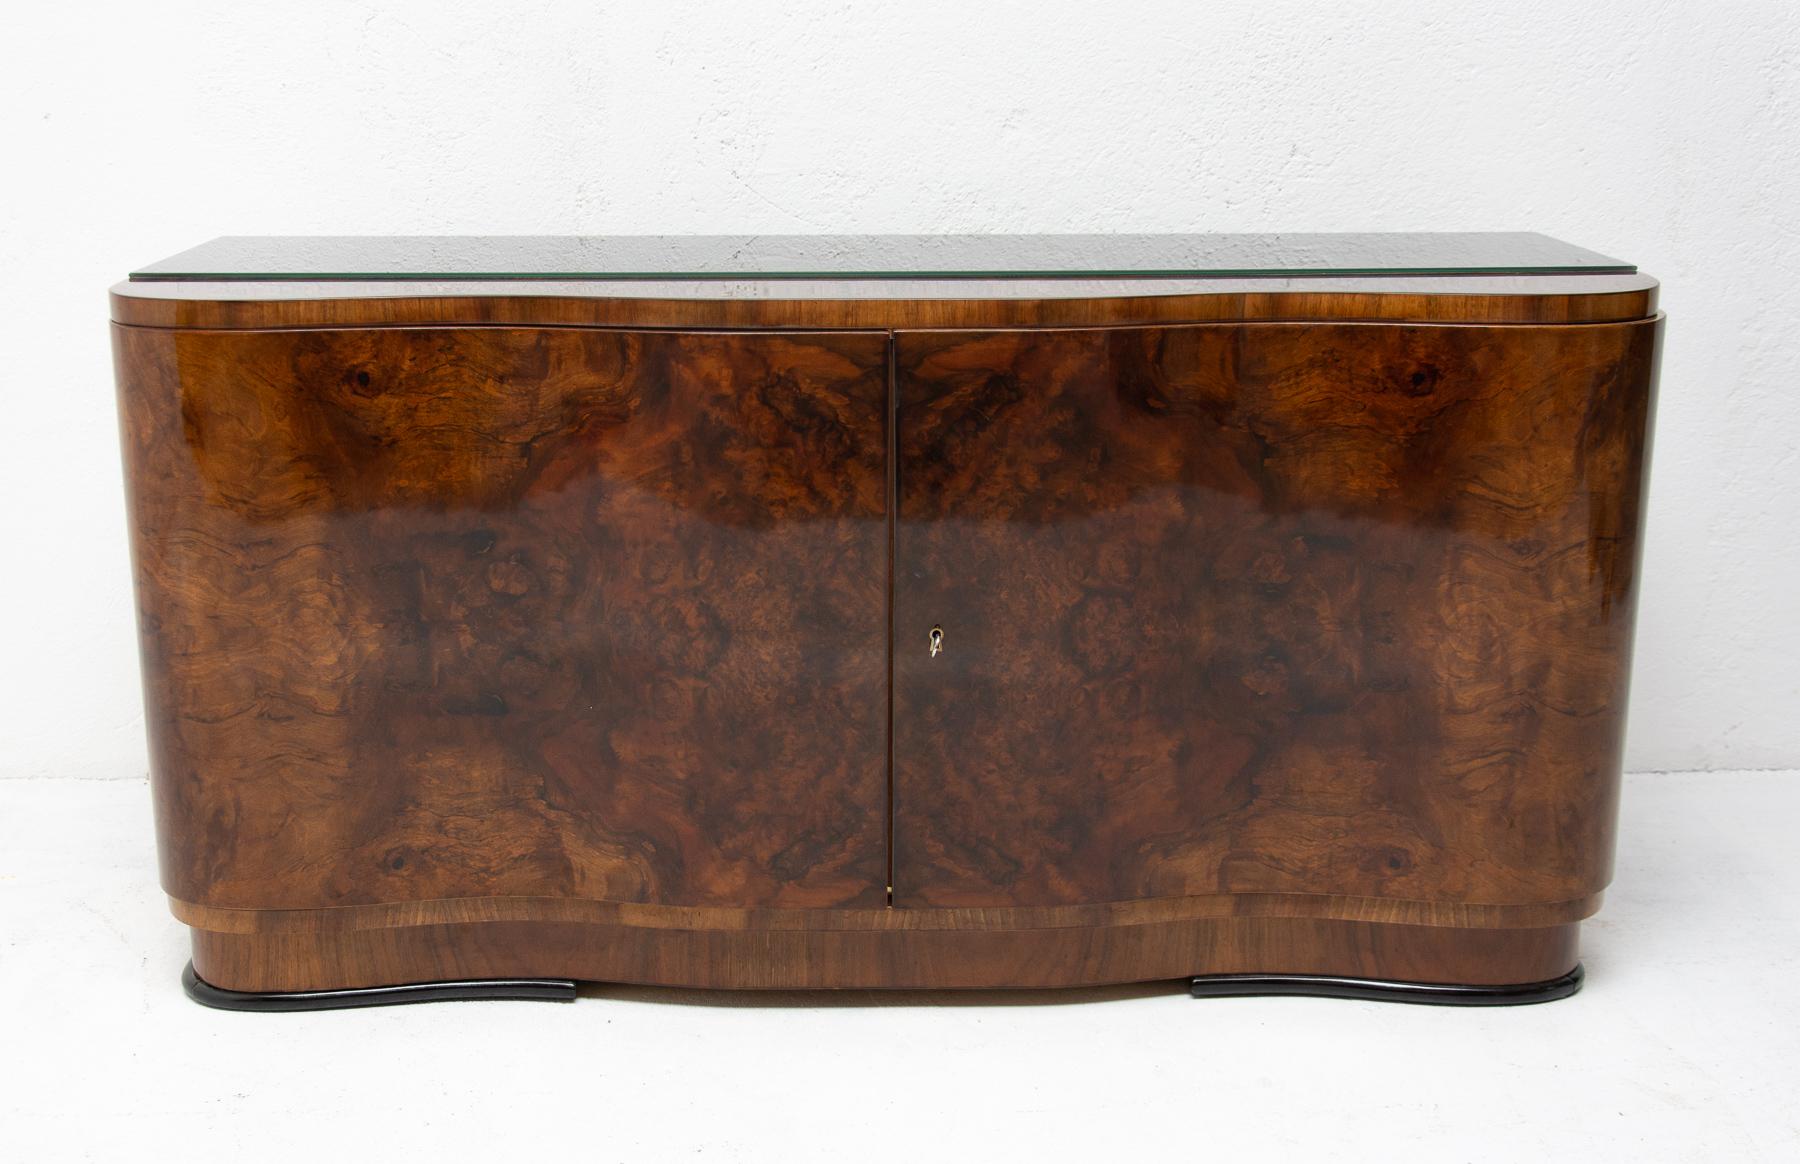 This sideboard was made in Bohemia in the 1930s. It´s an example of Central European Art Deco and is made of solid wood and veneered in walnut. It features a large storage space and the top is covered with a black glass. The cabinet can be also used